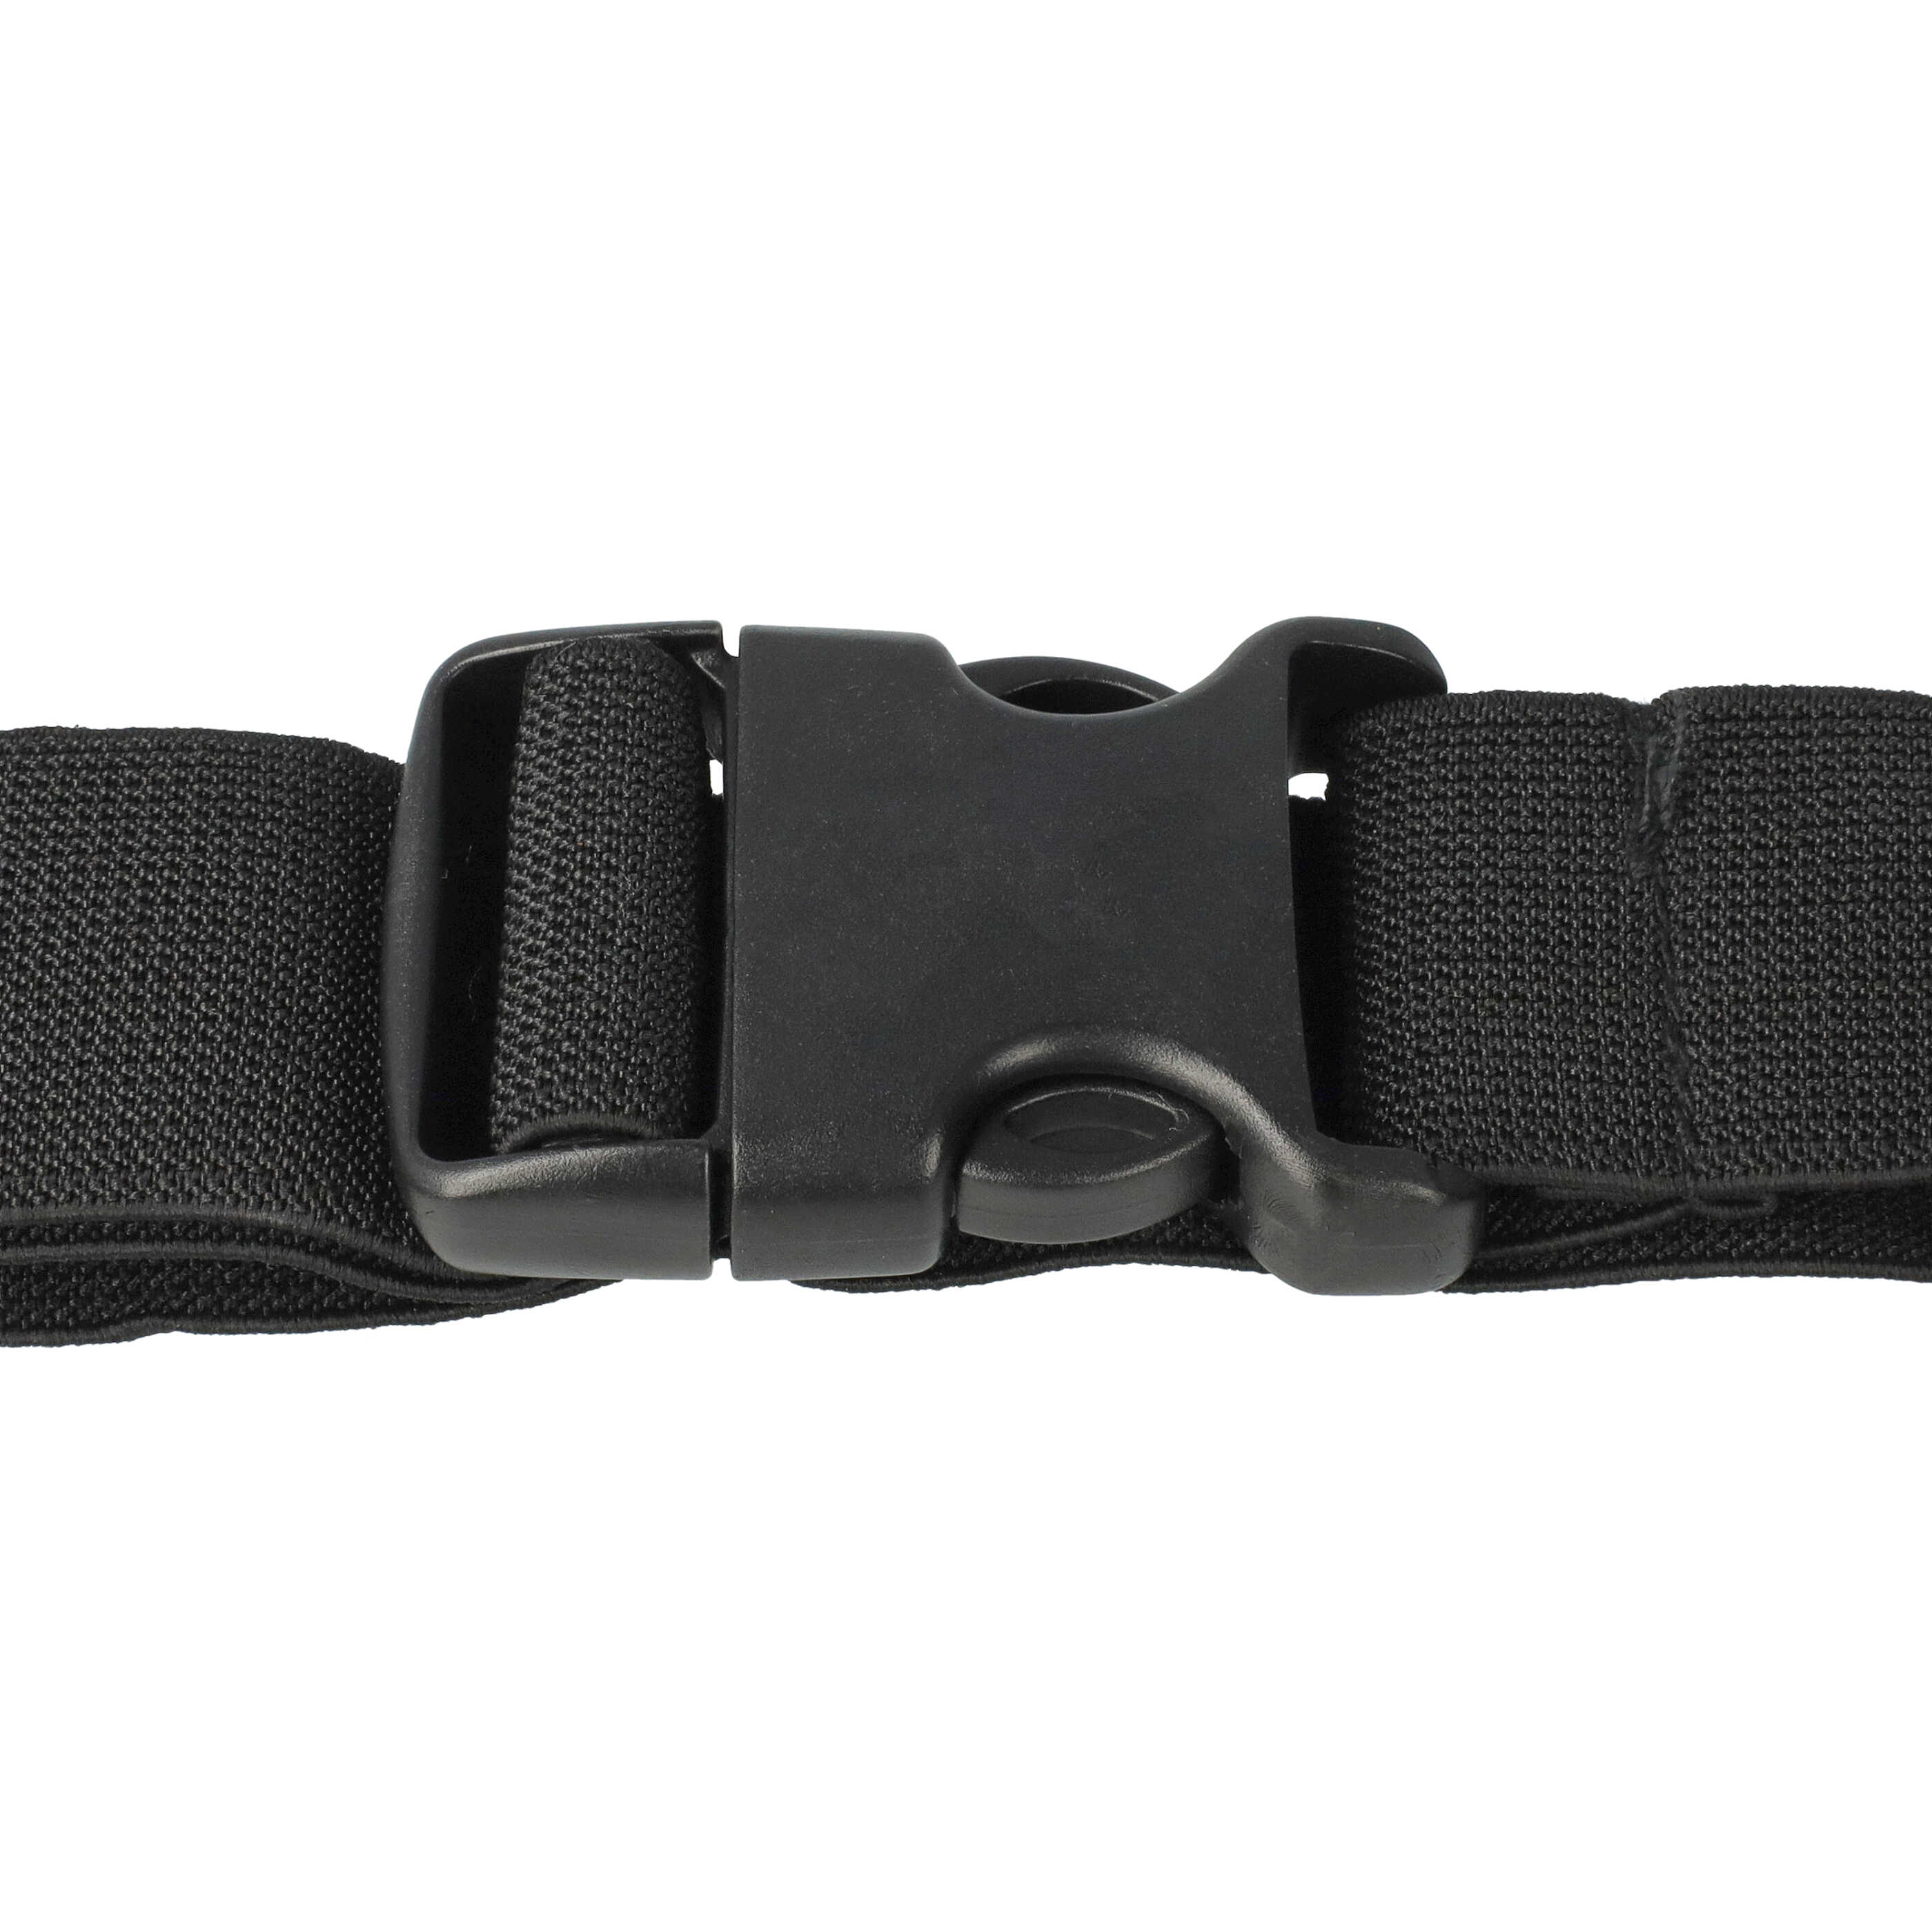 3 Way Chest Strap suitable for GoPro HD Hero Action Camera etc. - Adjustable, Mount, Quick Release Clip